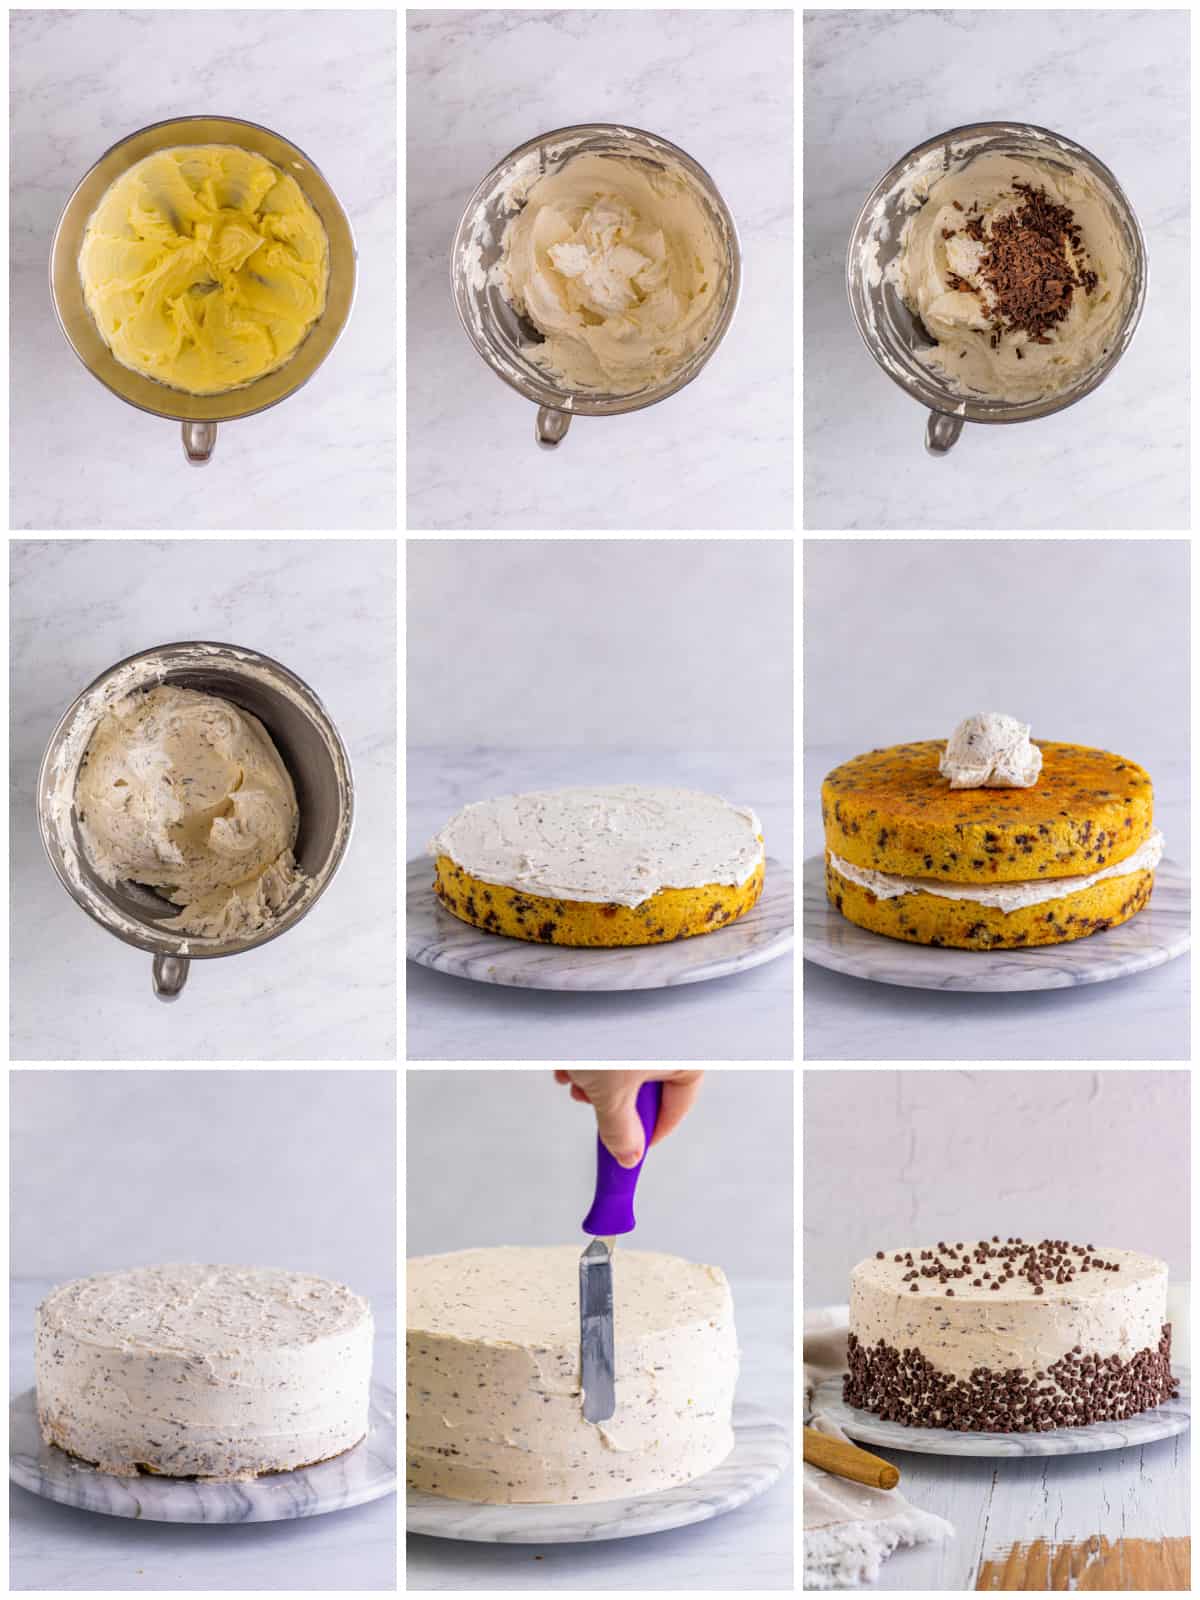 Step by step photos on how to make the frosting and assembly for The Best Chocolate Chip Cake.